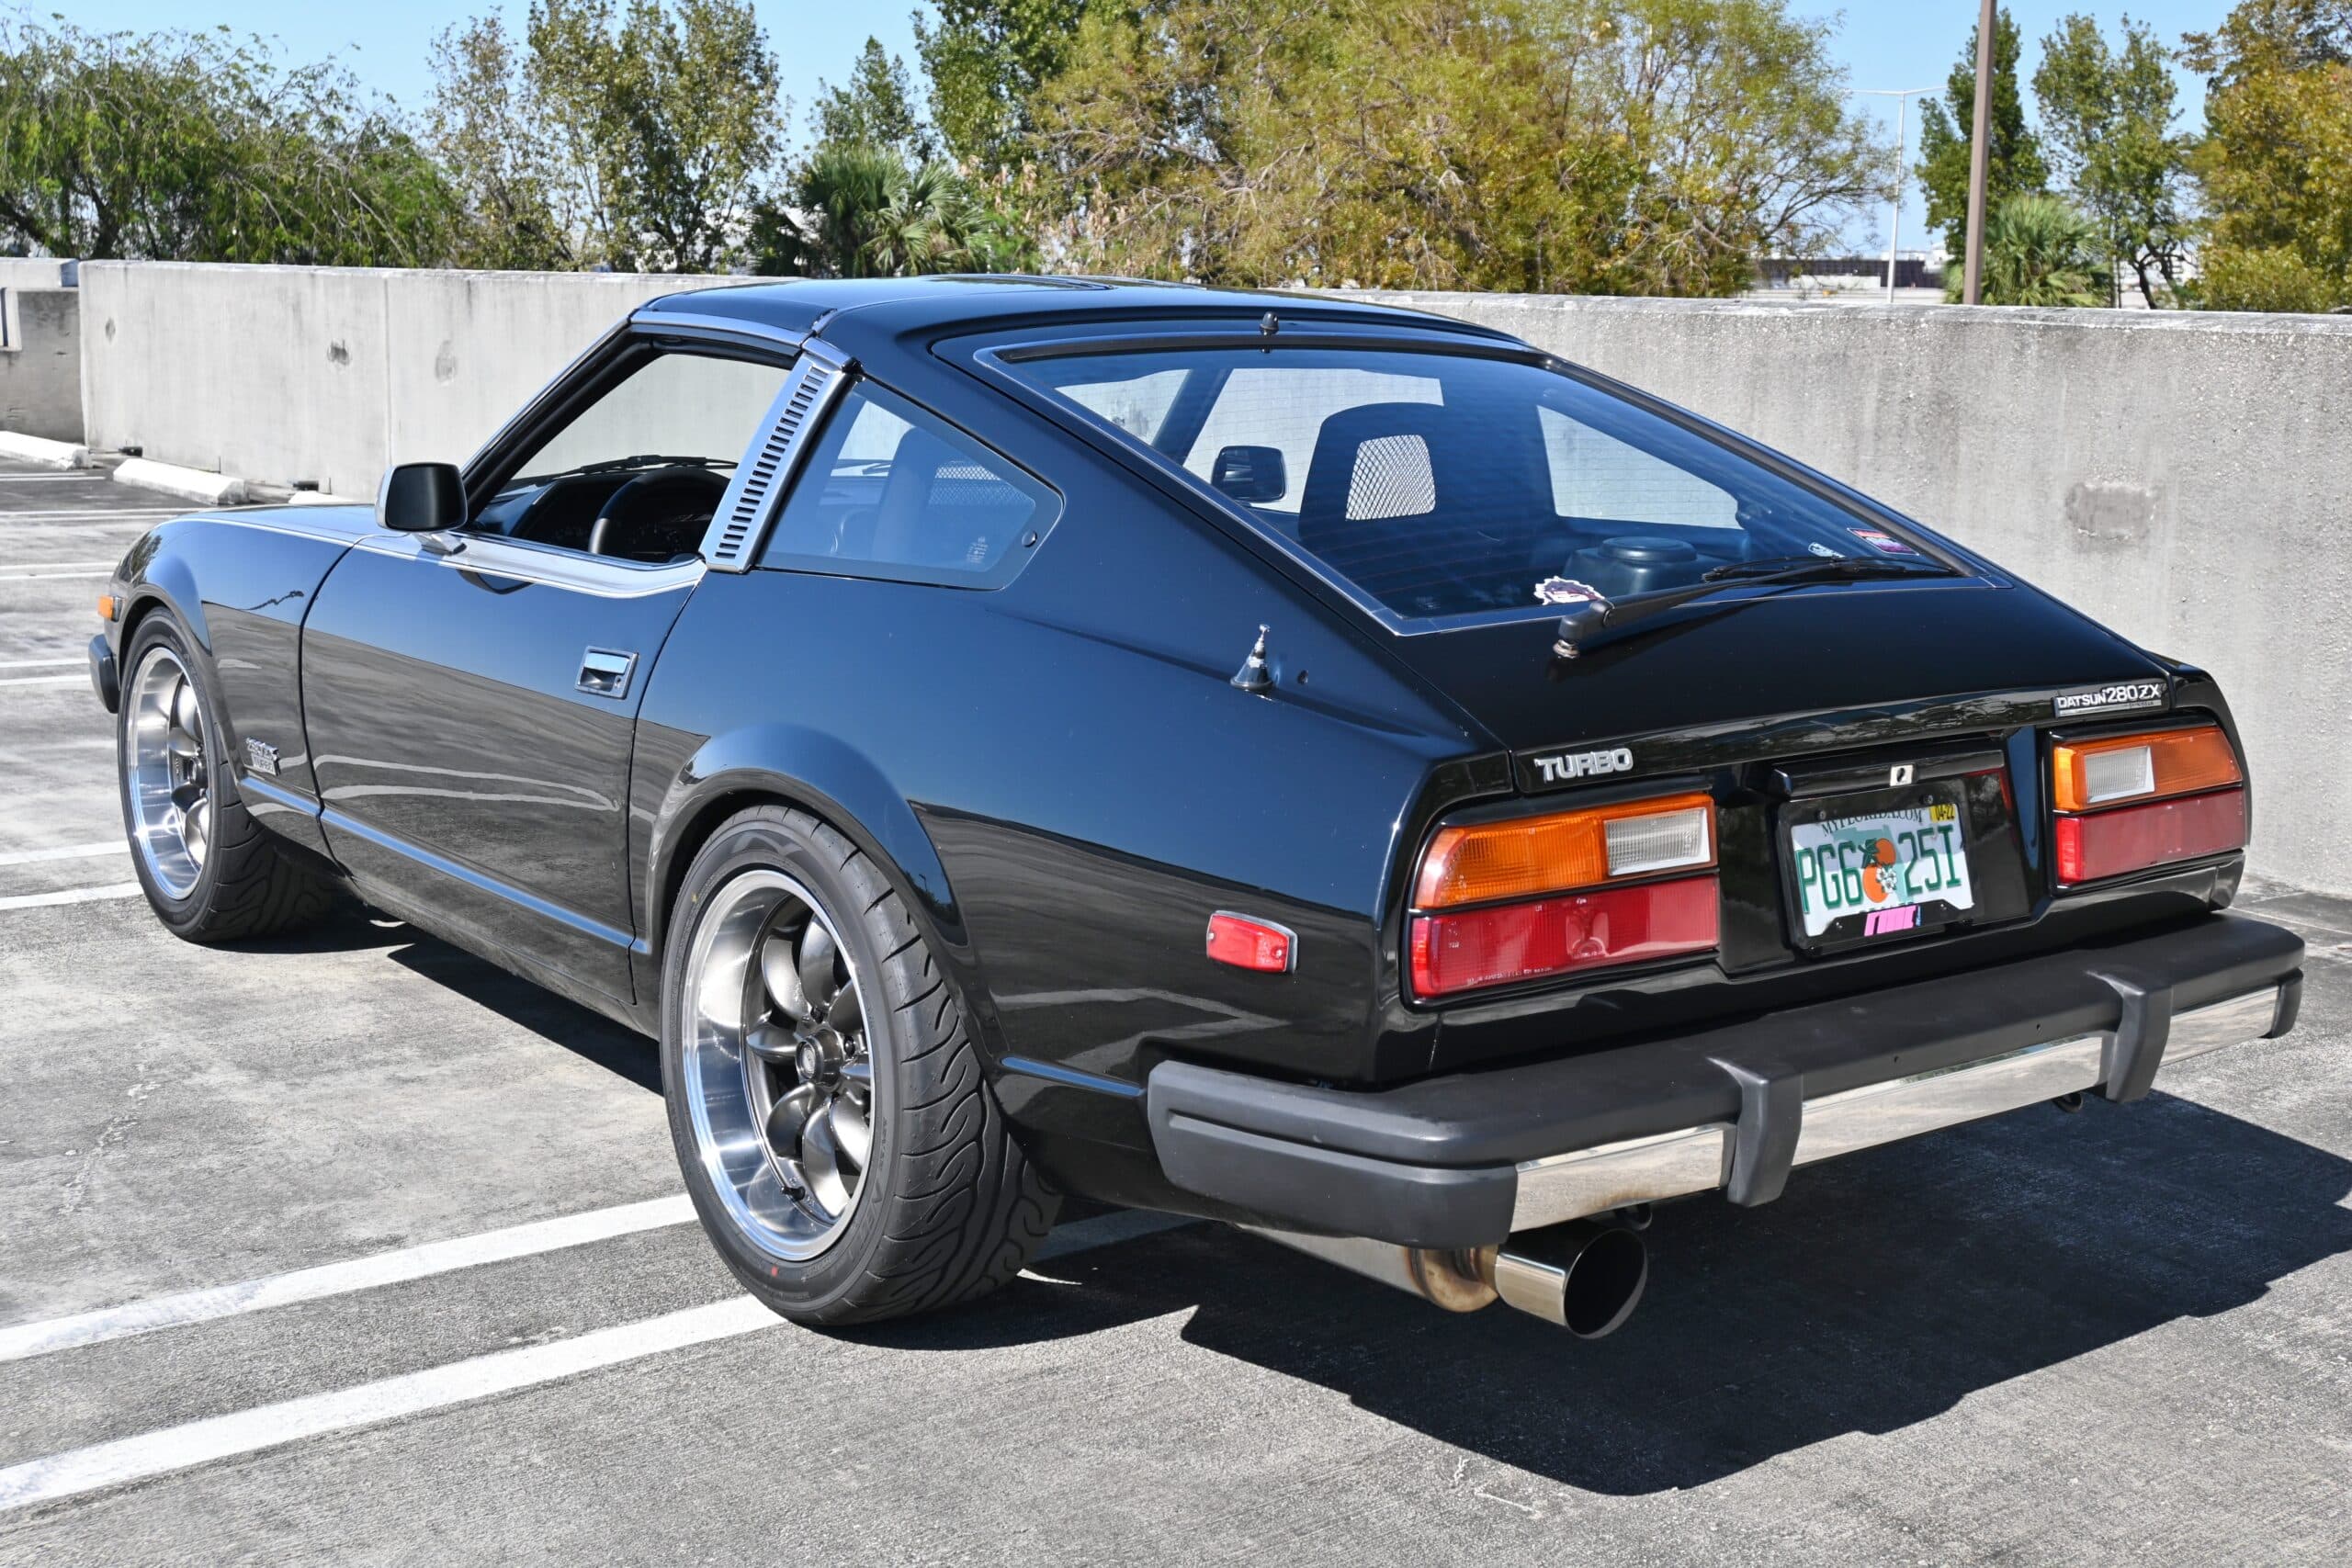 1981 Datsun Z-Series 280ZX Turbo 1 of 3 in this color combo- 52k Miles – Recaro Seats – T Tops – Service Records